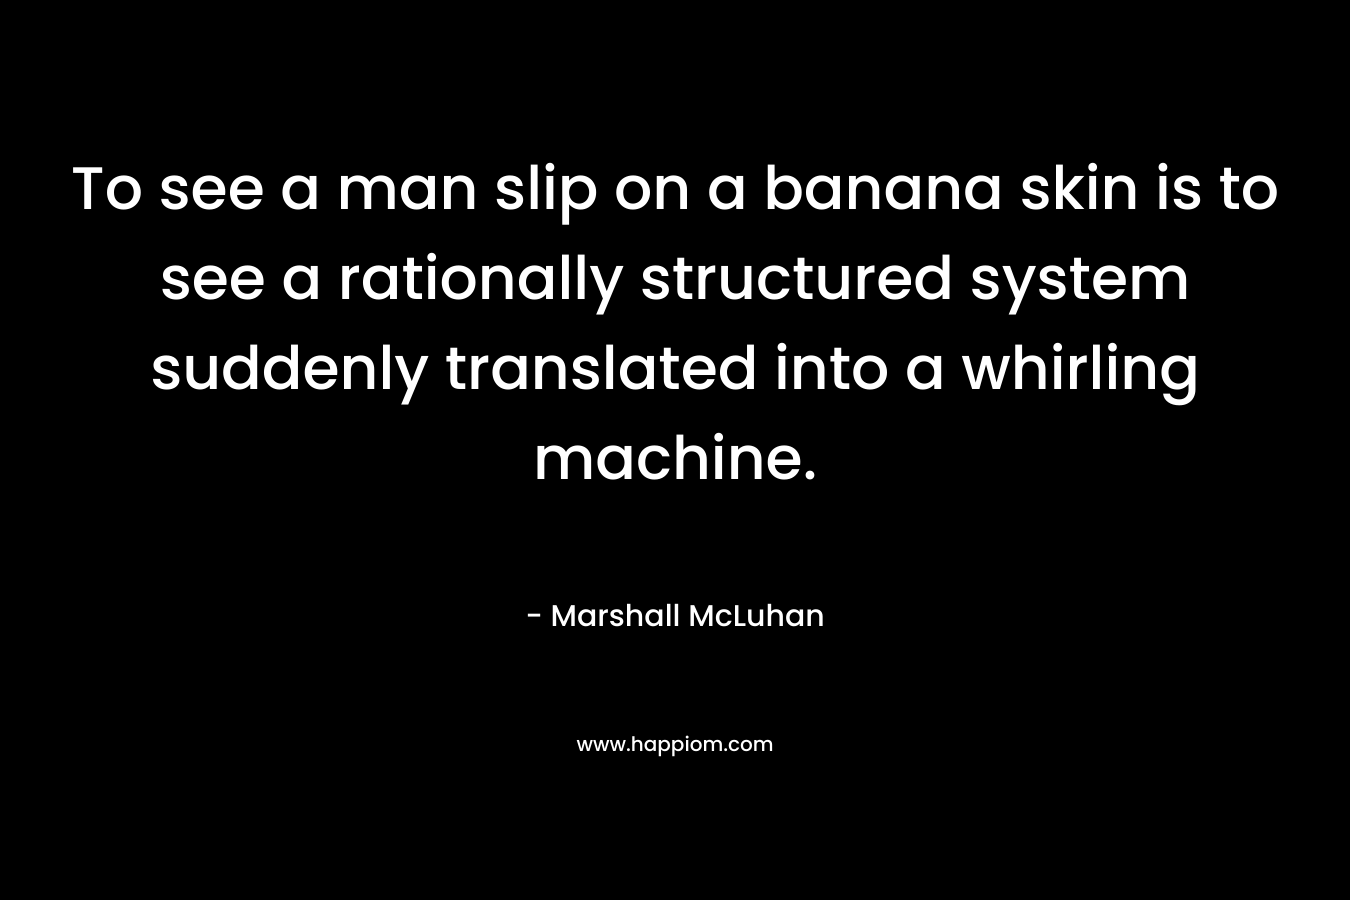 To see a man slip on a banana skin is to see a rationally structured system suddenly translated into a whirling machine. – Marshall McLuhan